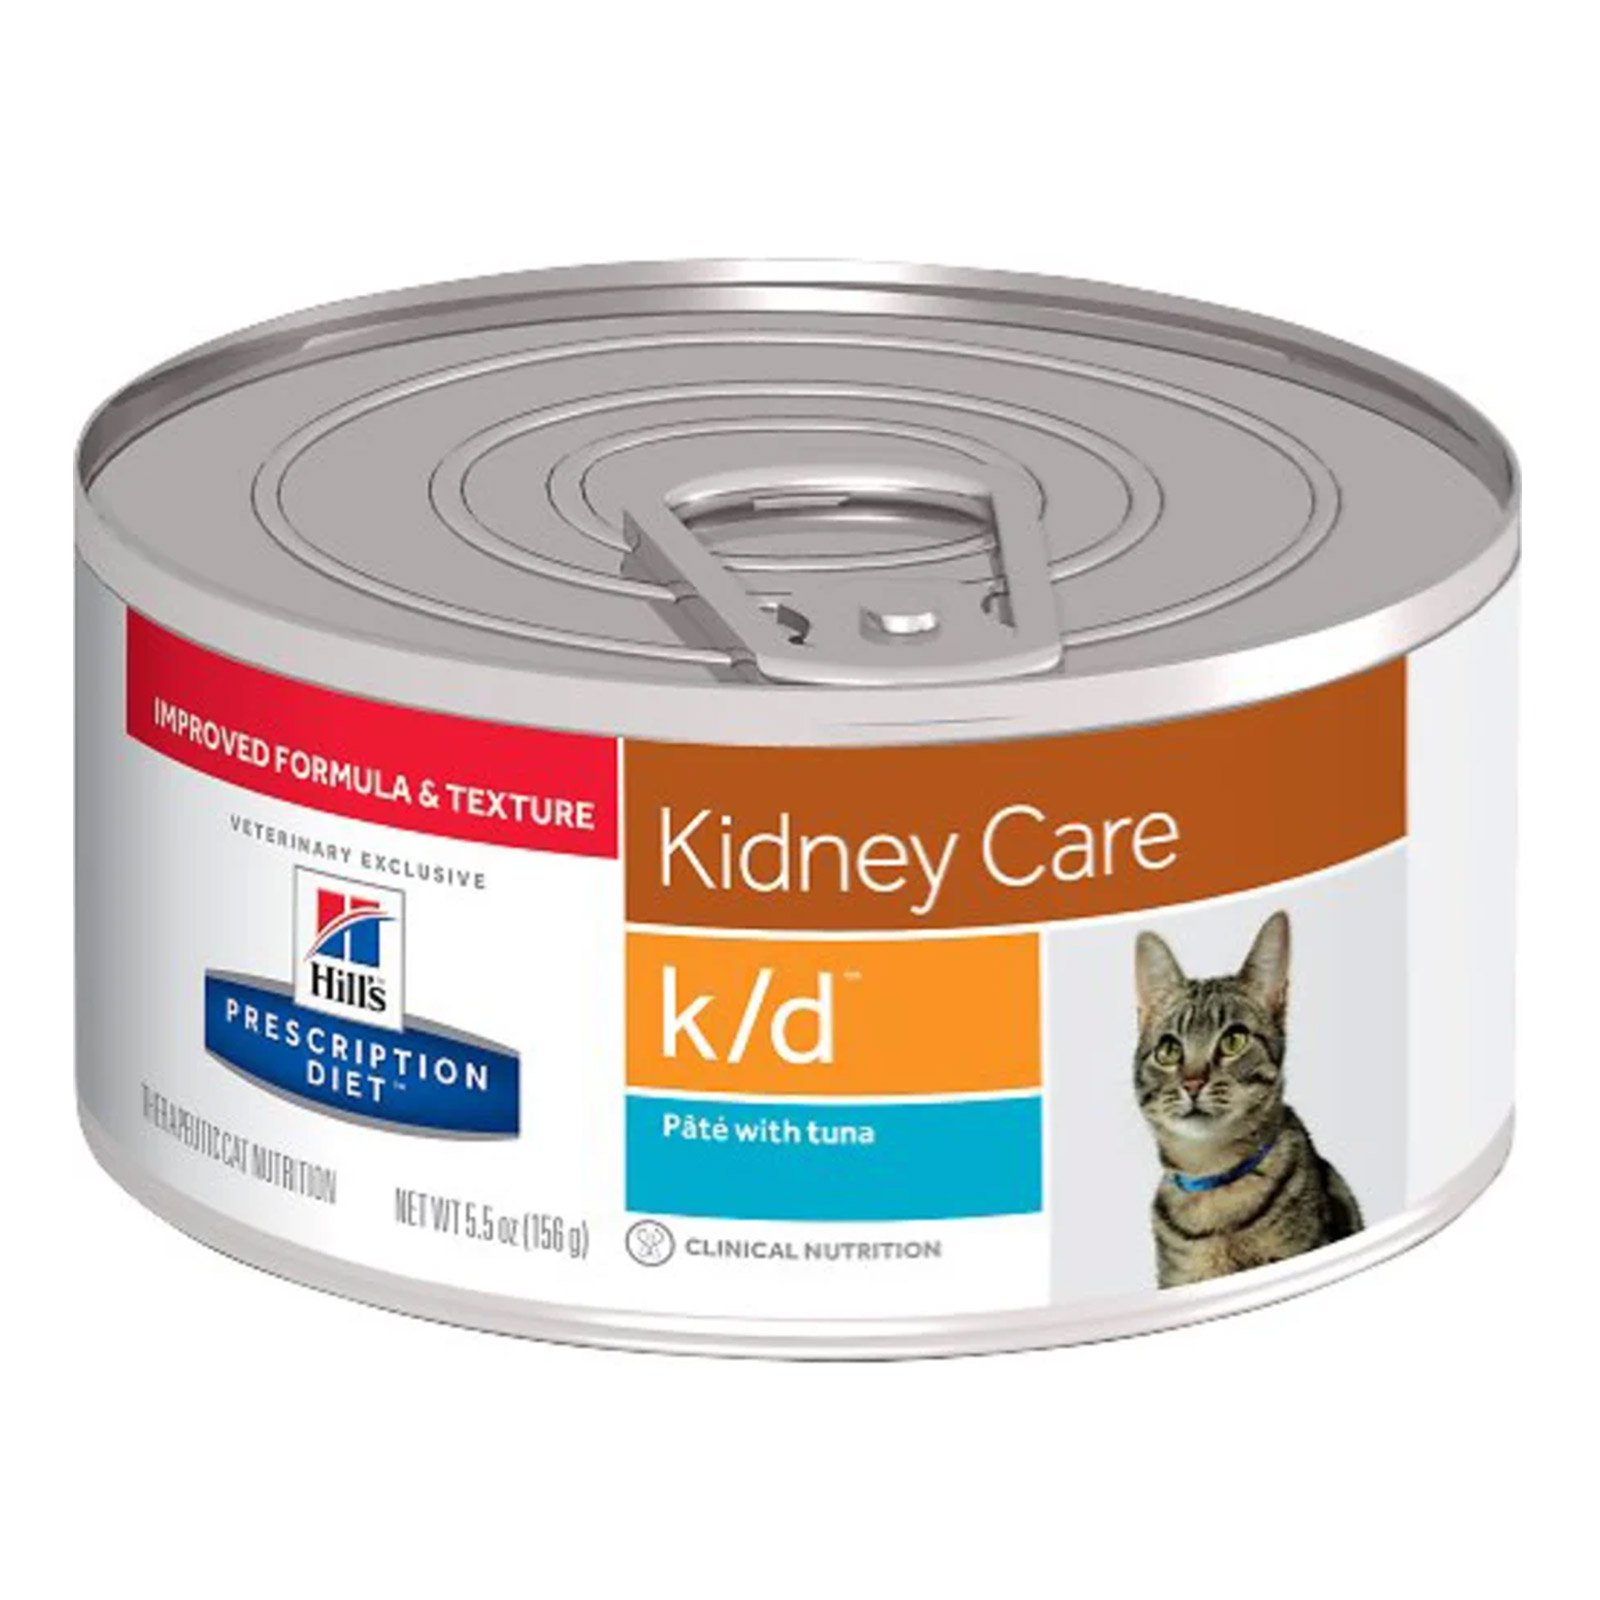 Hill's Prescription Diet k/d Kidney Care with Tuna Canned Cat Food for Food